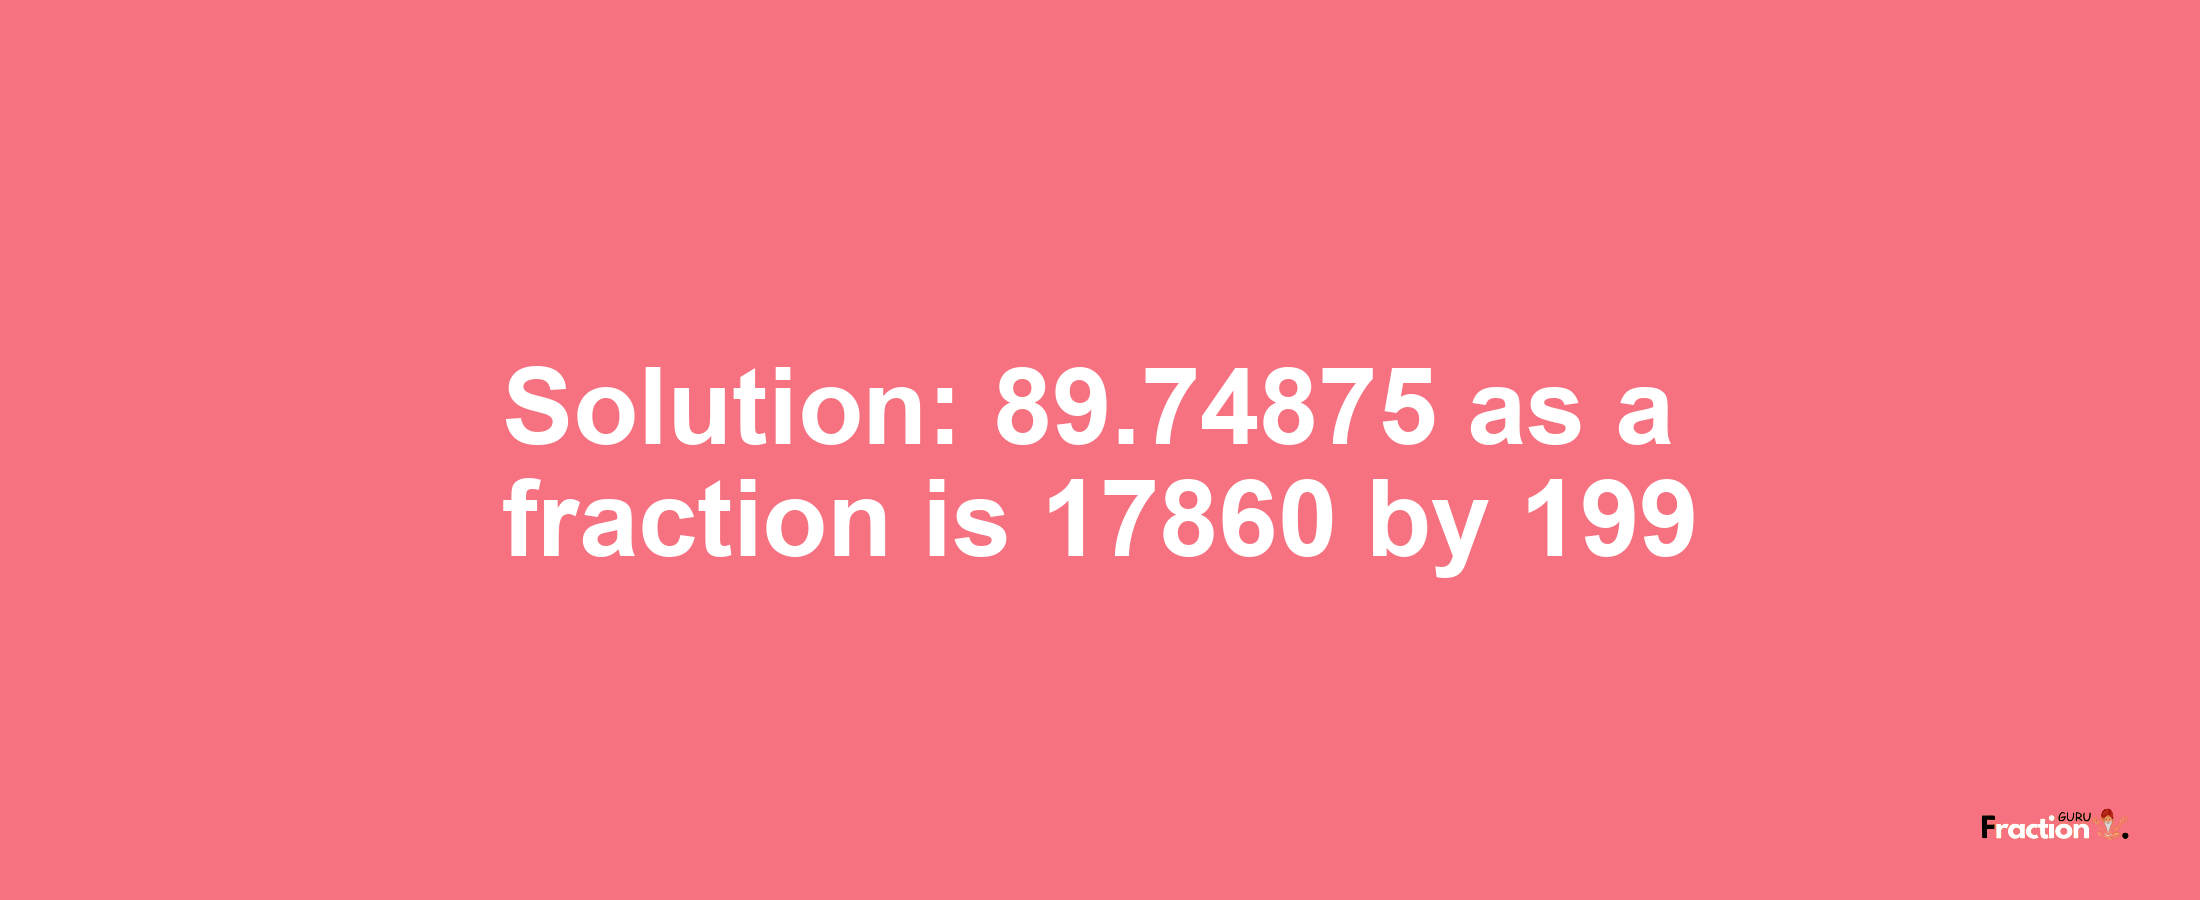 Solution:89.74875 as a fraction is 17860/199